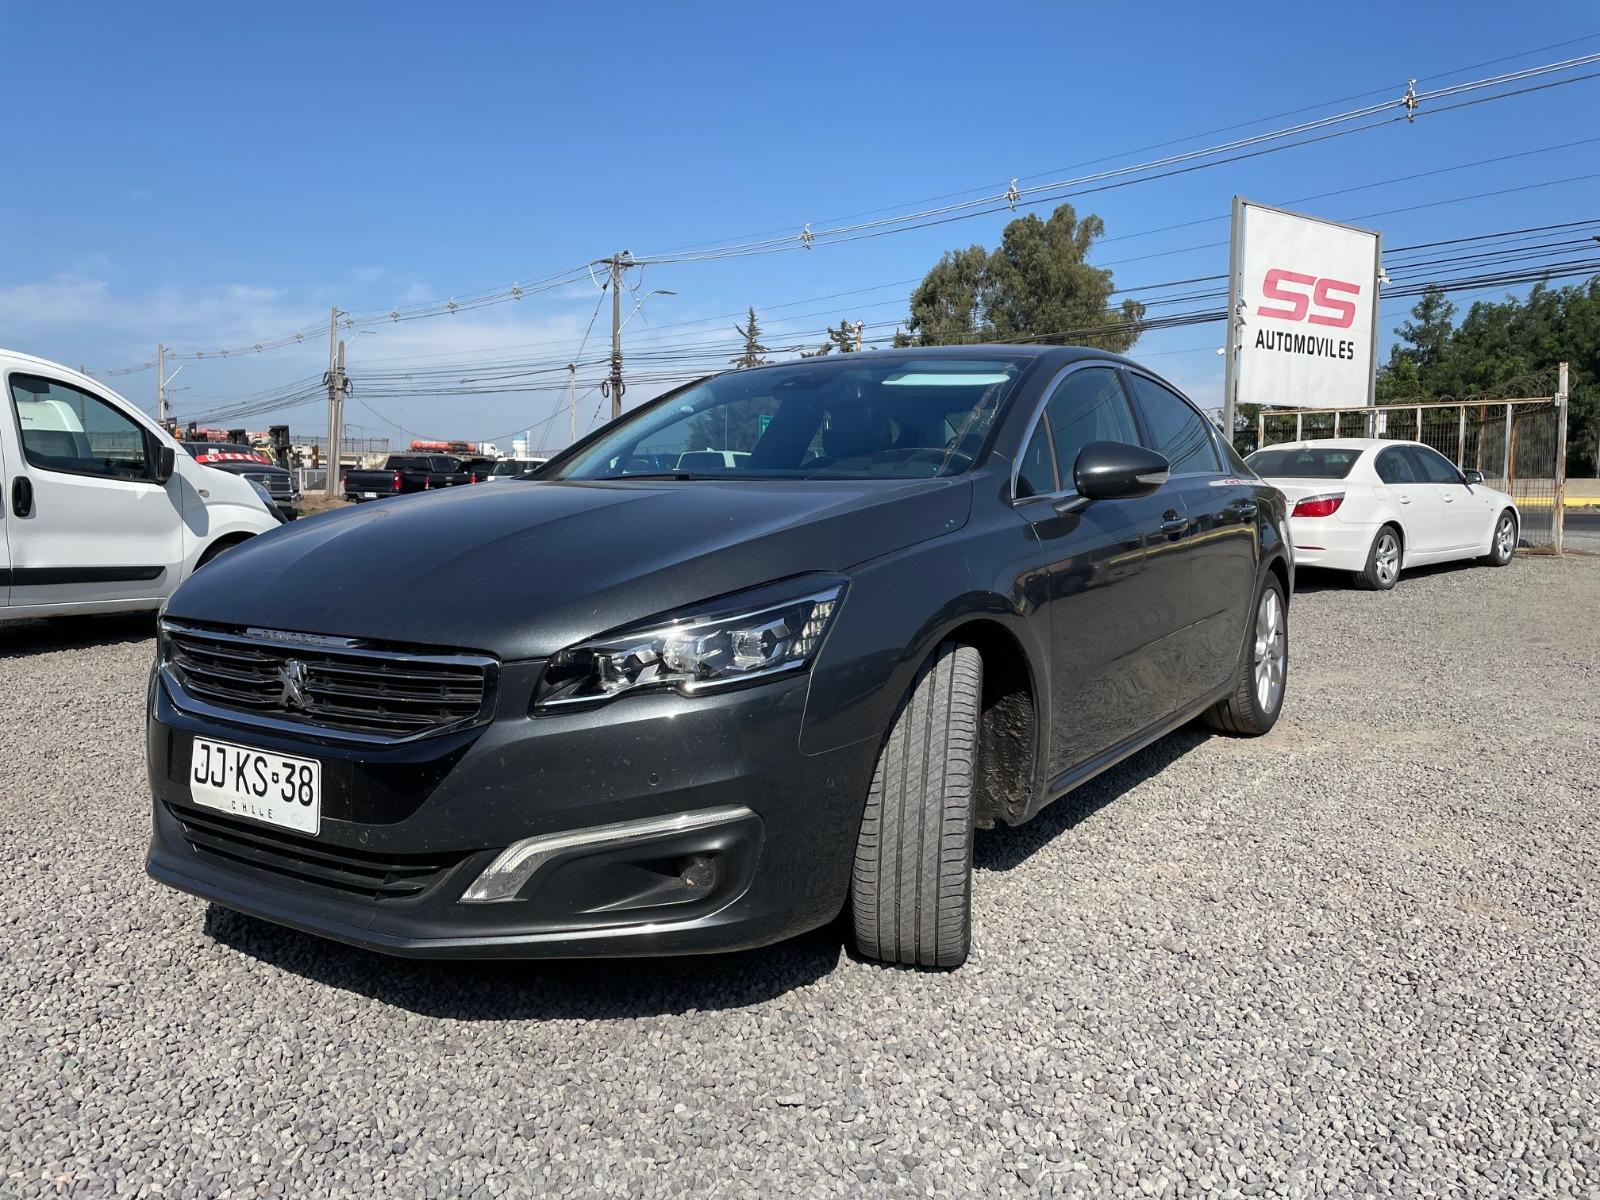 PEUGEOT 508 508 HDI AT Allure 2017 Peugeot 508 - SS AUTOMOVILES